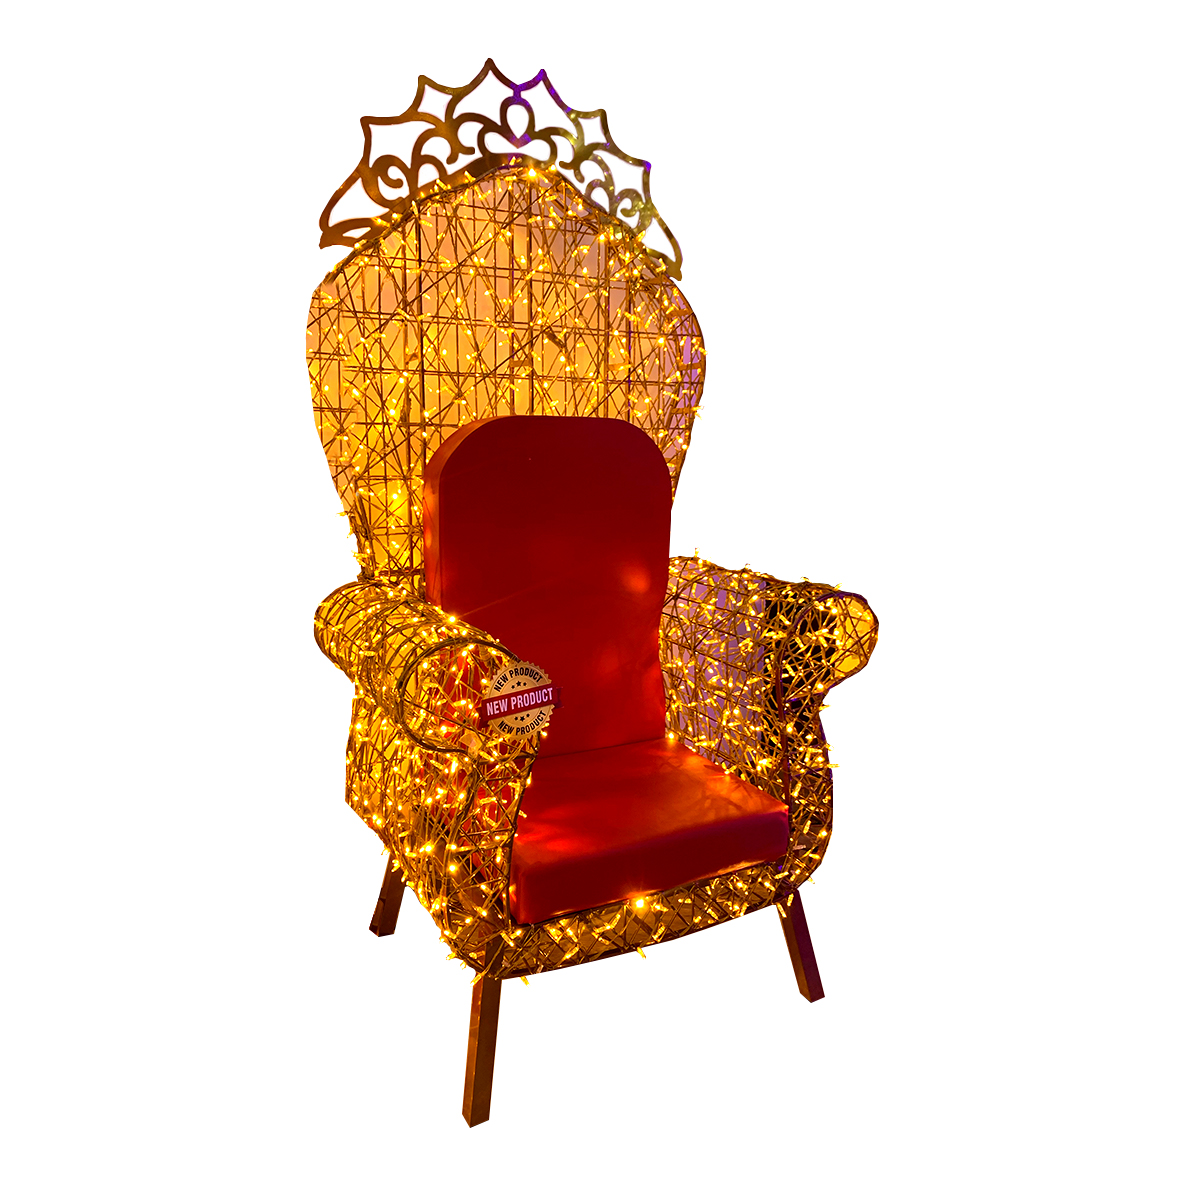 3D Santa Throne - Large Commercial Illuminated Display - Real Cushioned Seat - Life-Size